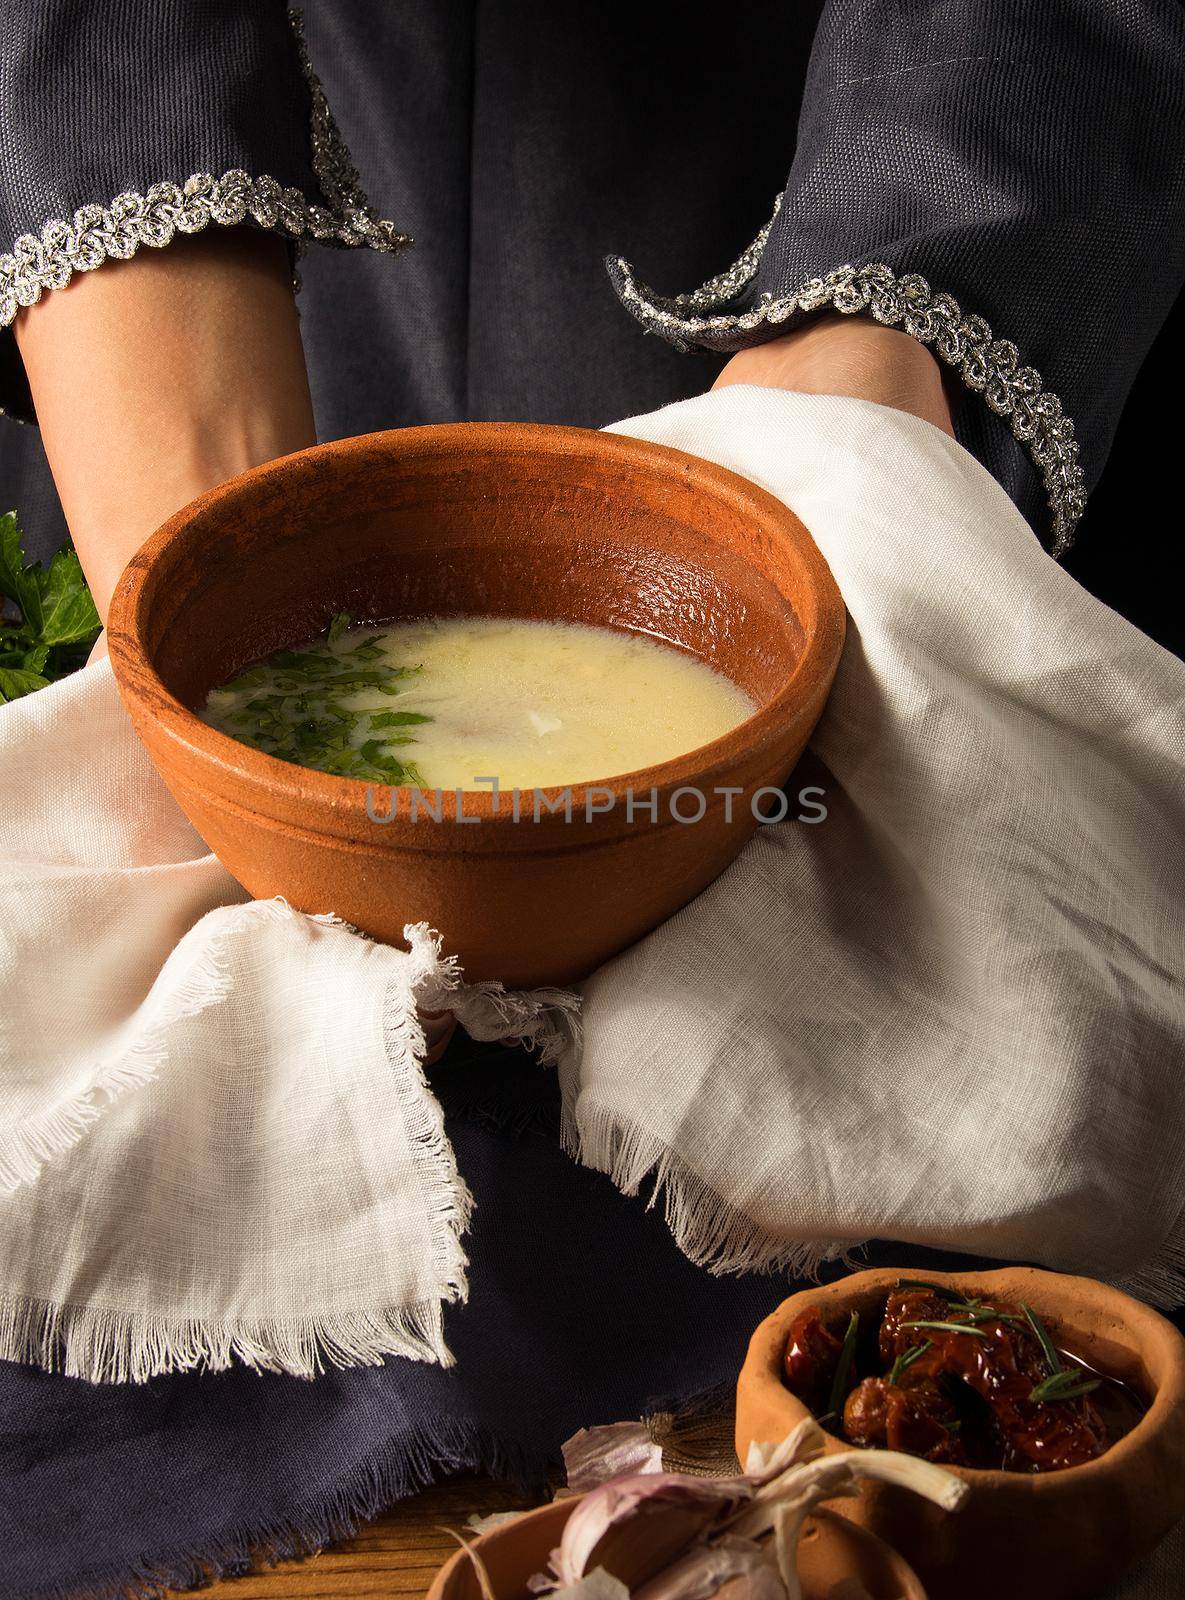 A shot of a dish in hands